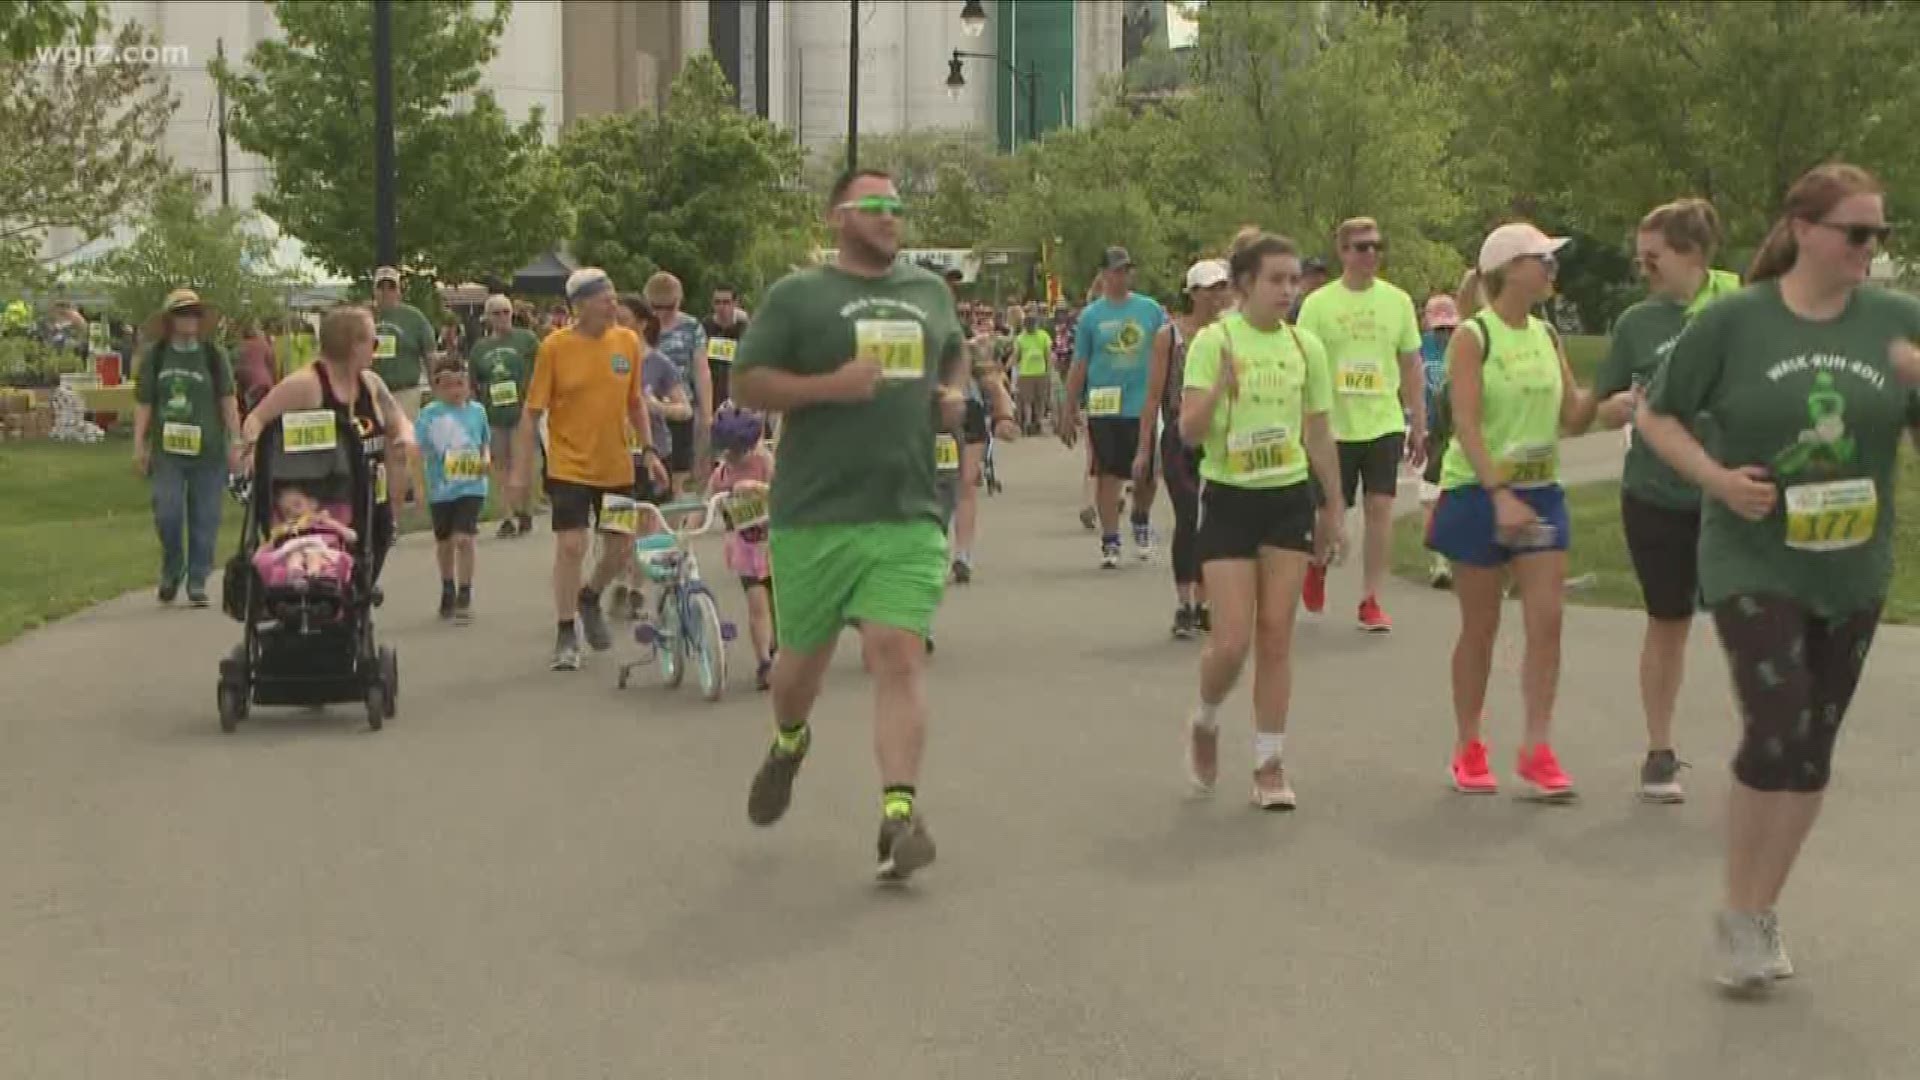 The 5-k run and 1-mile walk raises money and awareness for the make lemon aide foundation which helps those living with Cerebral Palsy.